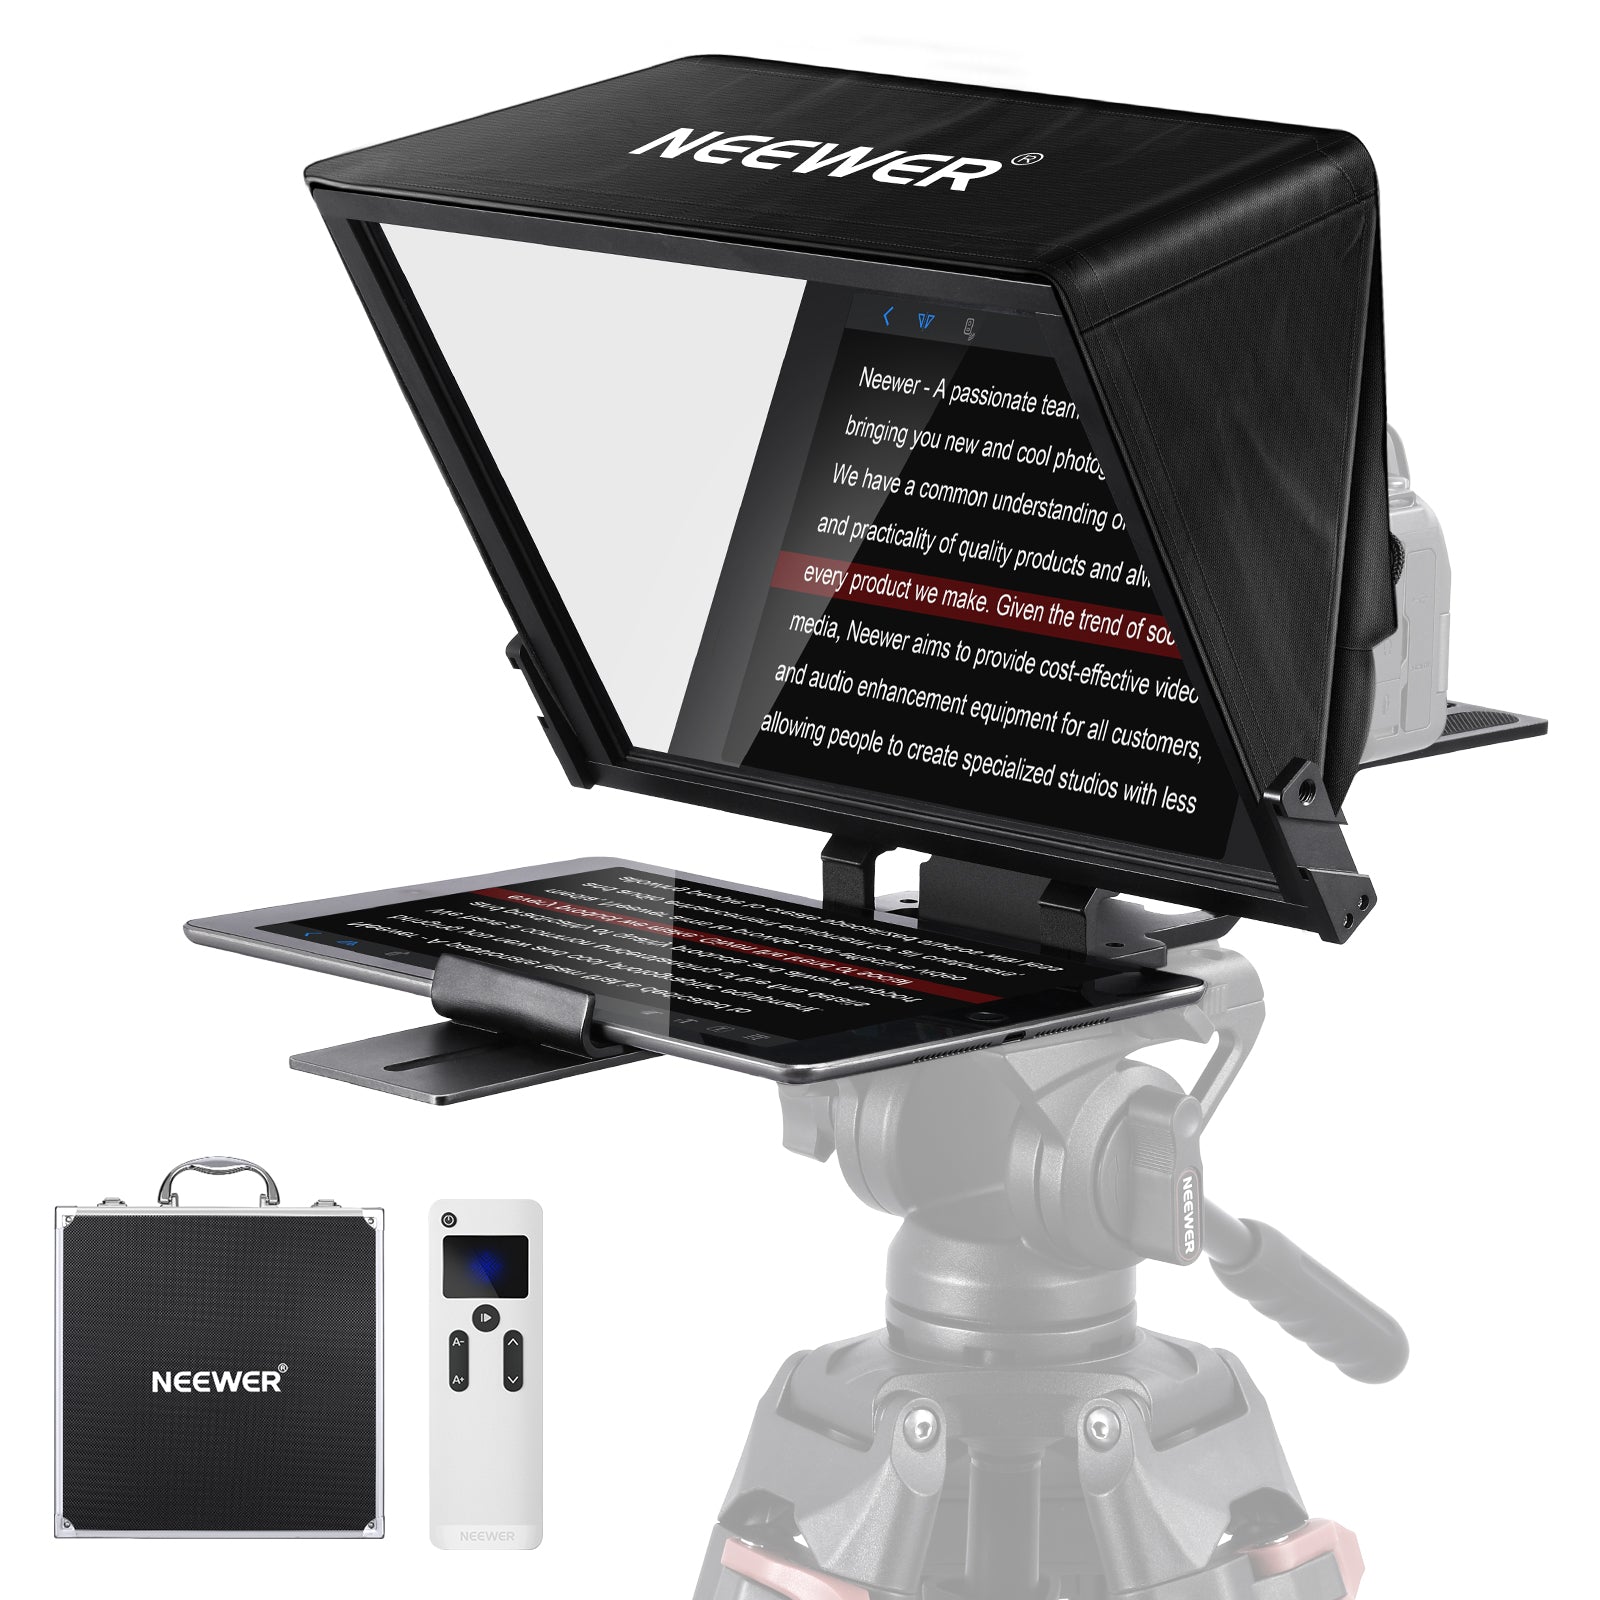 NEEWER X14 PRO Remote Teleprompter